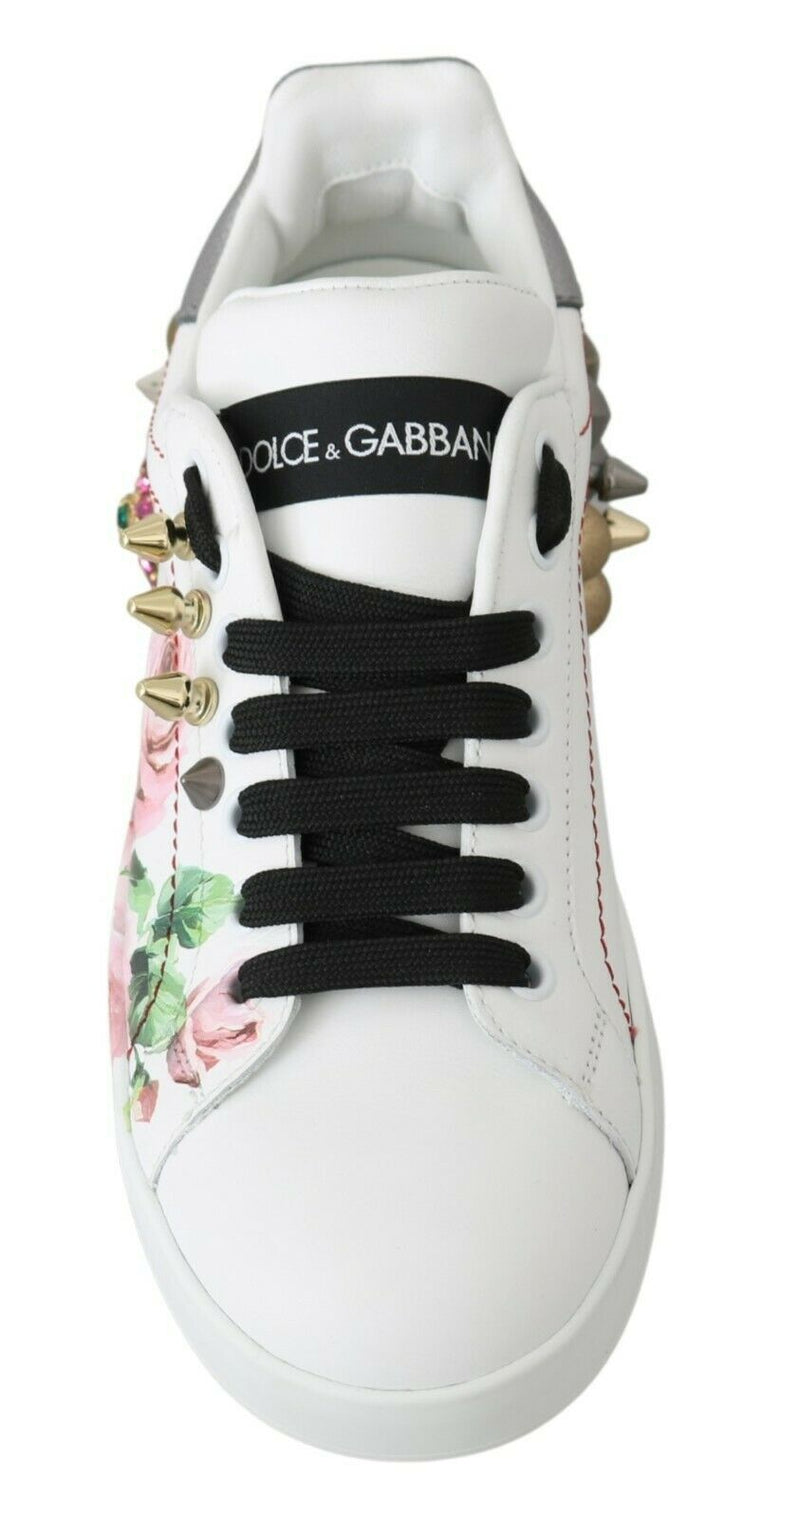 Dolce & Gabbana Floral Crystal-Embellished Leather Women's Sneakers